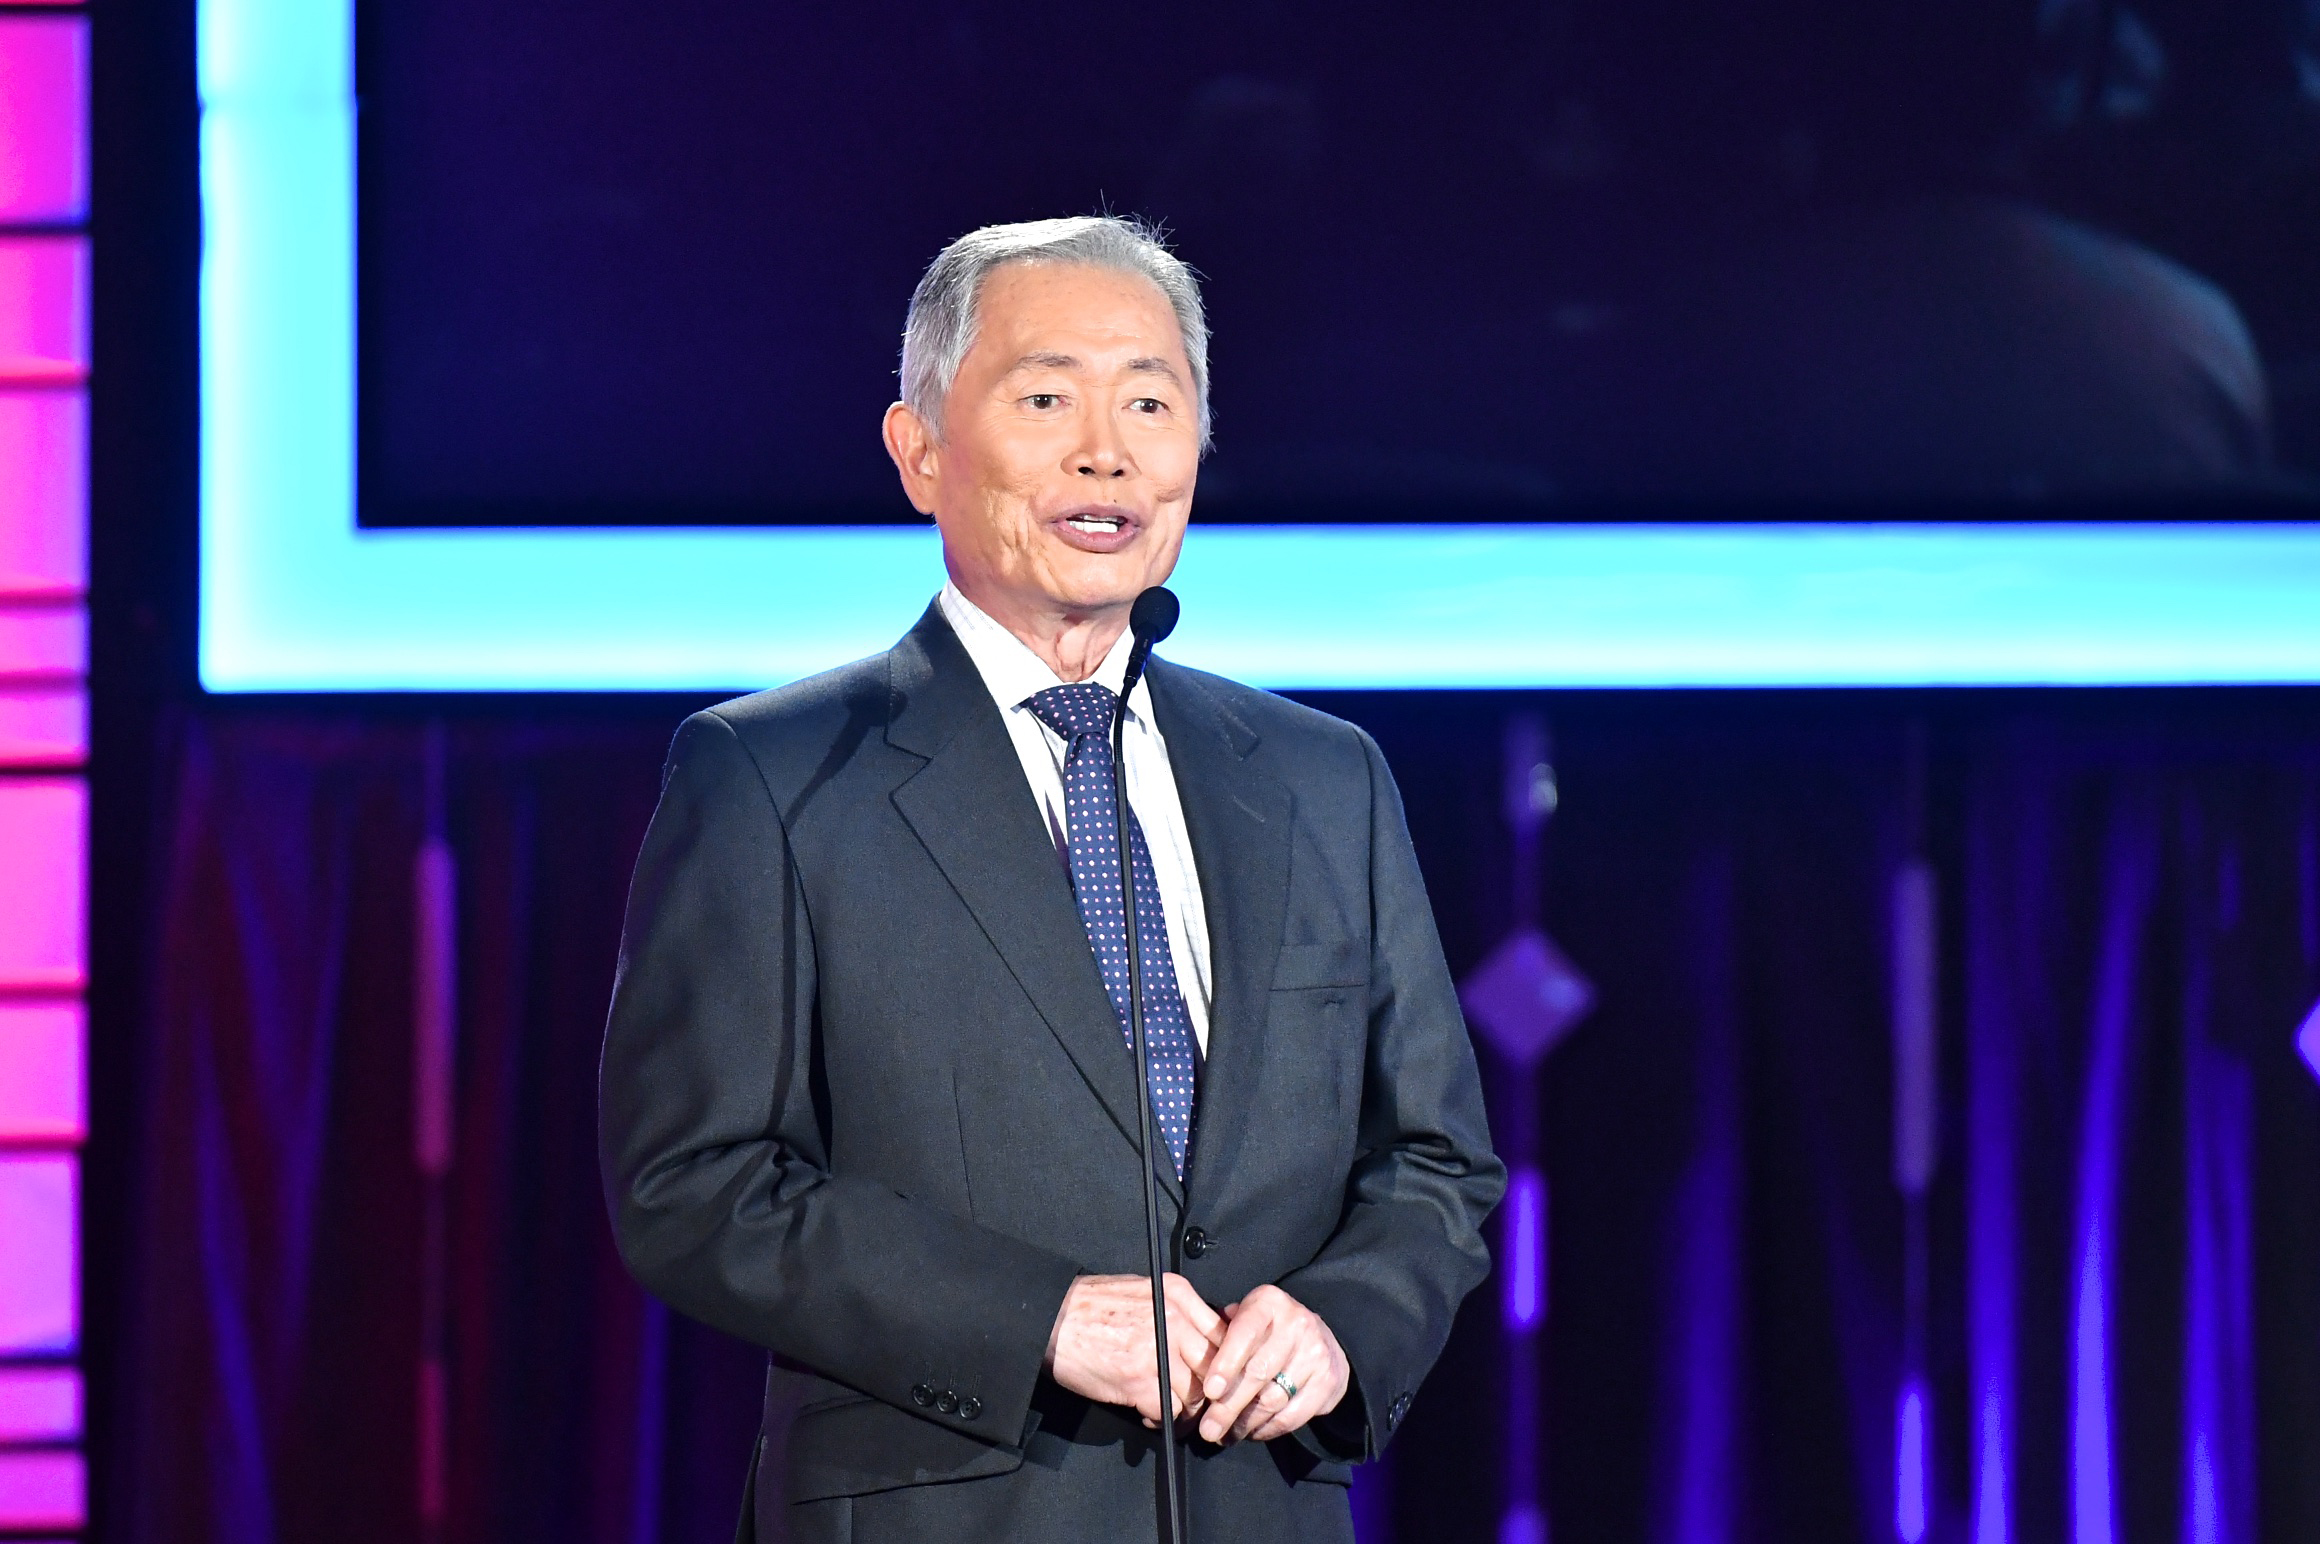 PHOTO: Presenter George Takei speaks onstage at AARP's 16th Annual Movies For Grownups Awards at the Beverly Wilshire Four Seasons Hotel, Feb. 6, 2017 in Beverly Hills, Calif. 